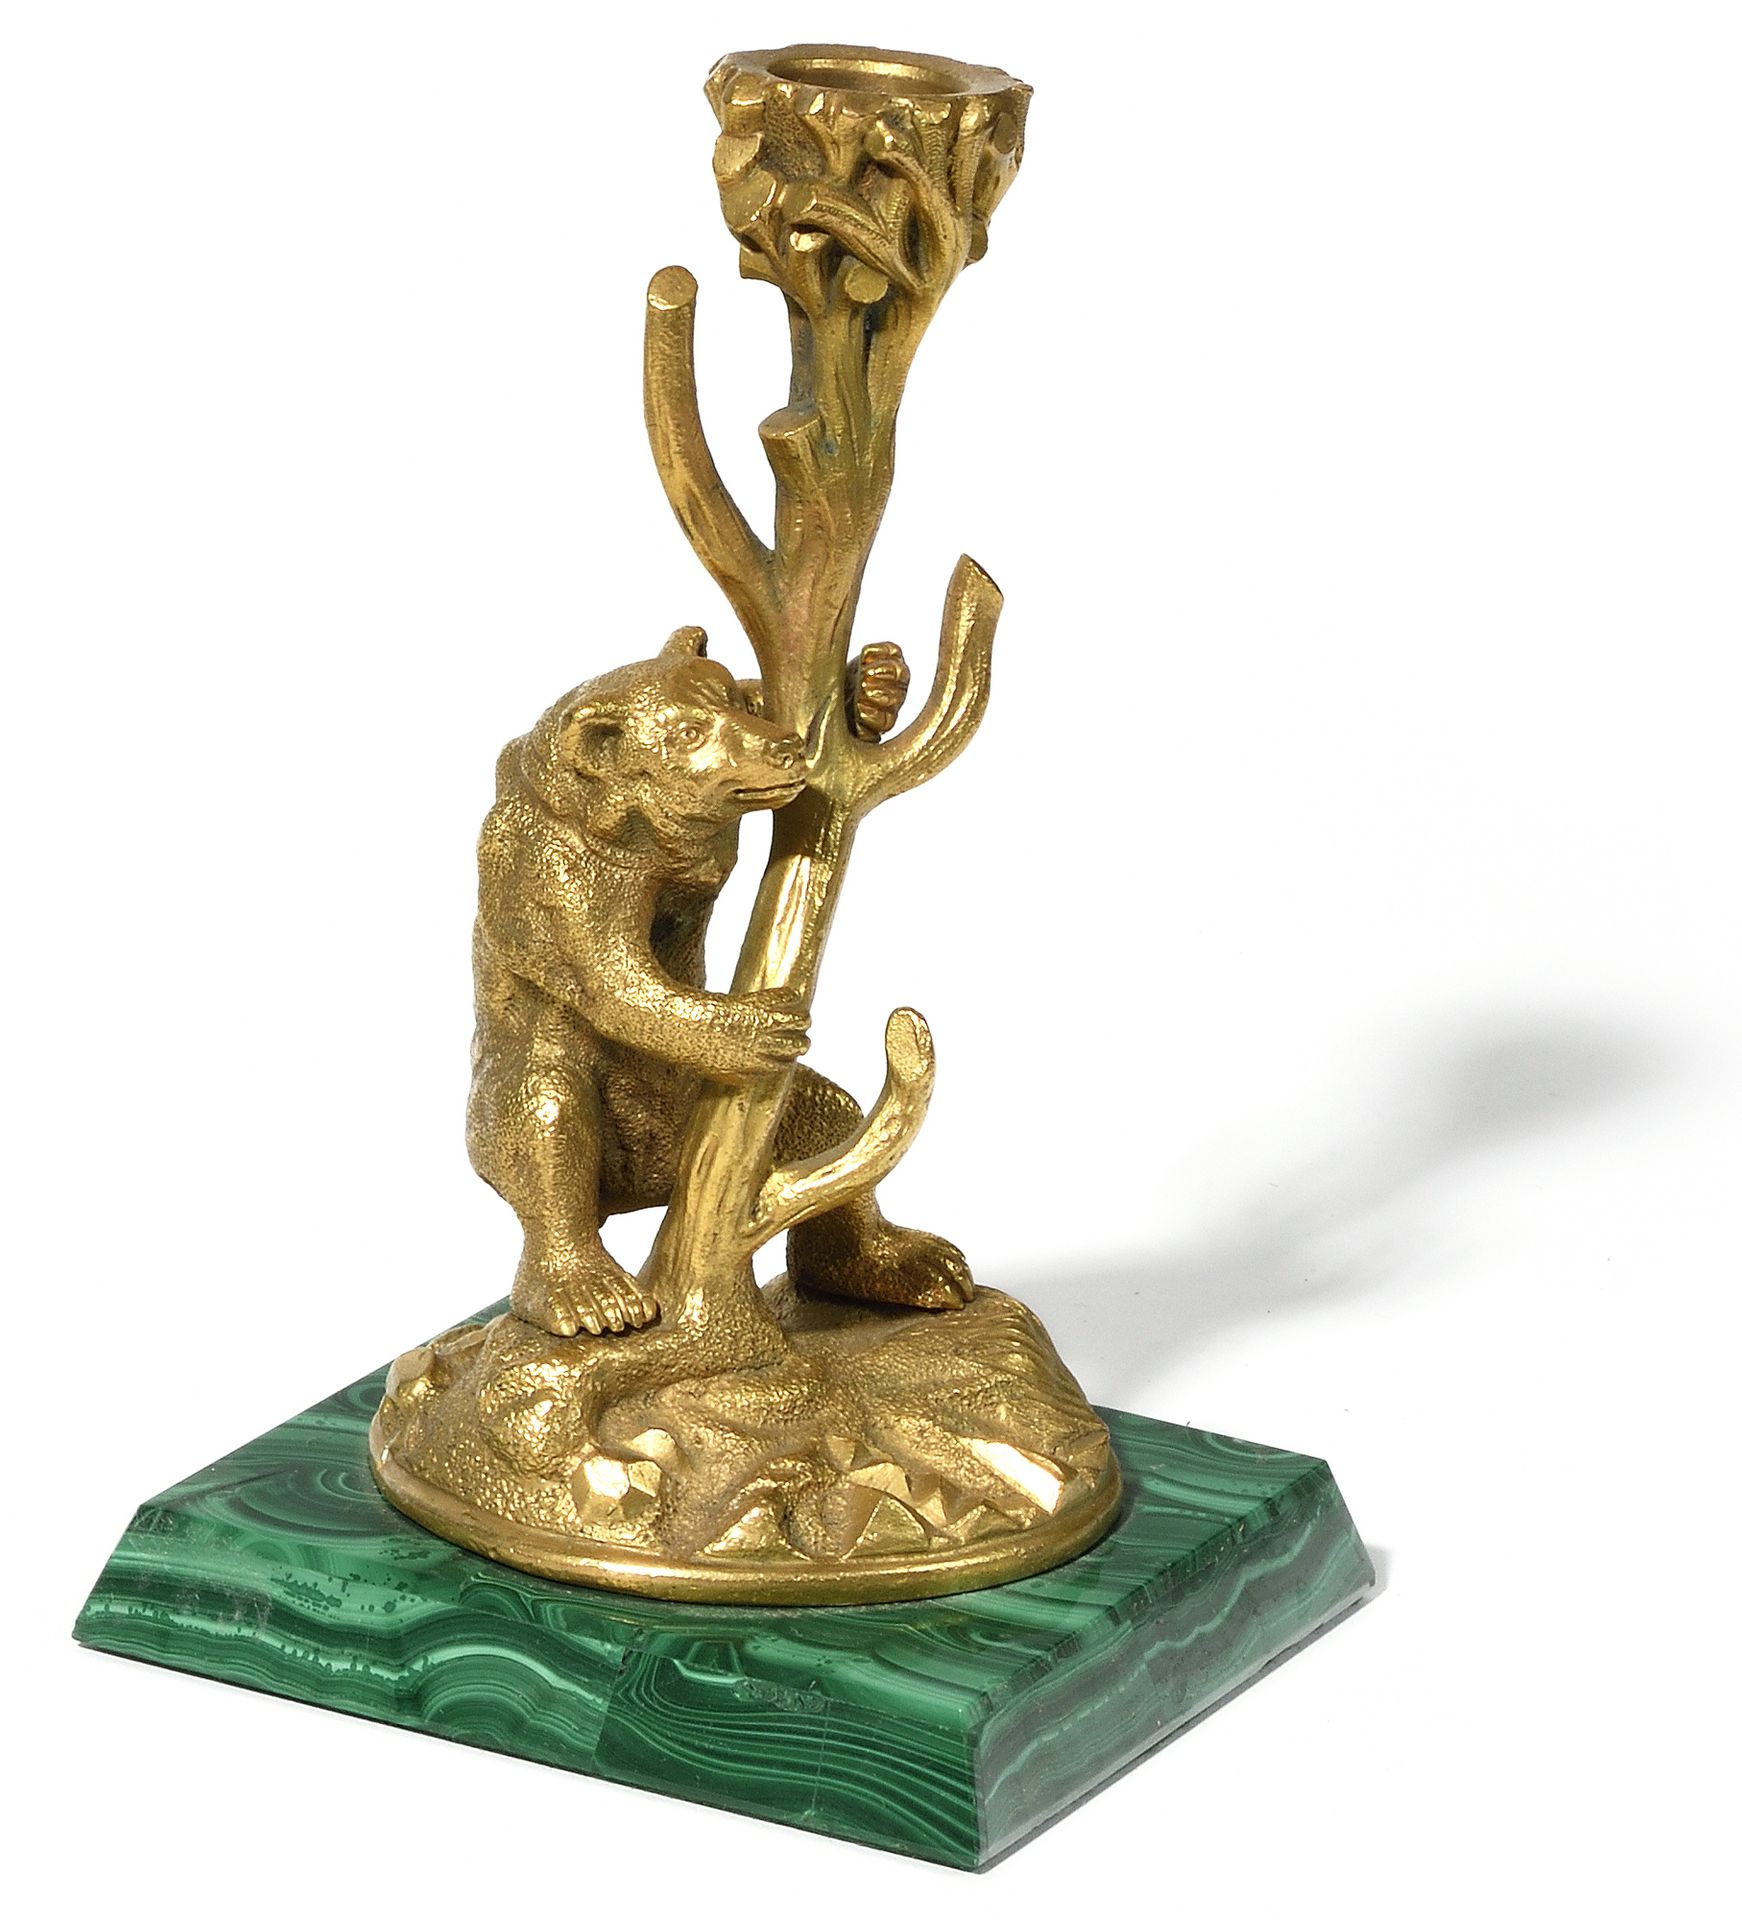 Null CANDLESTICK

Decorated with a bear figurine

Gilded bronze, malachite

20 x&hellip;